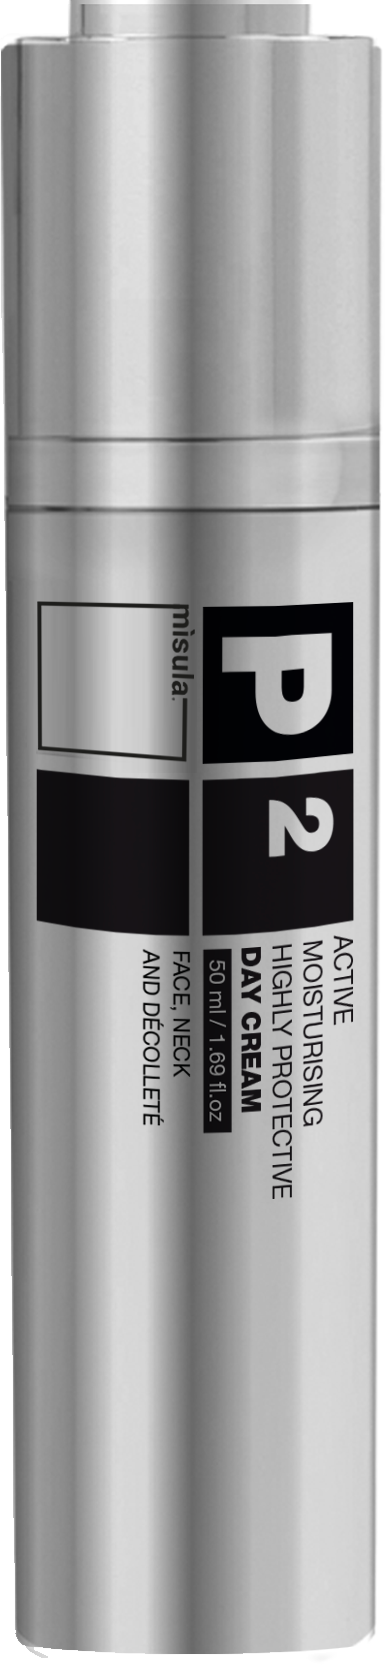 P2 Active moisturizing highly protective day cream face, neck and décolleté